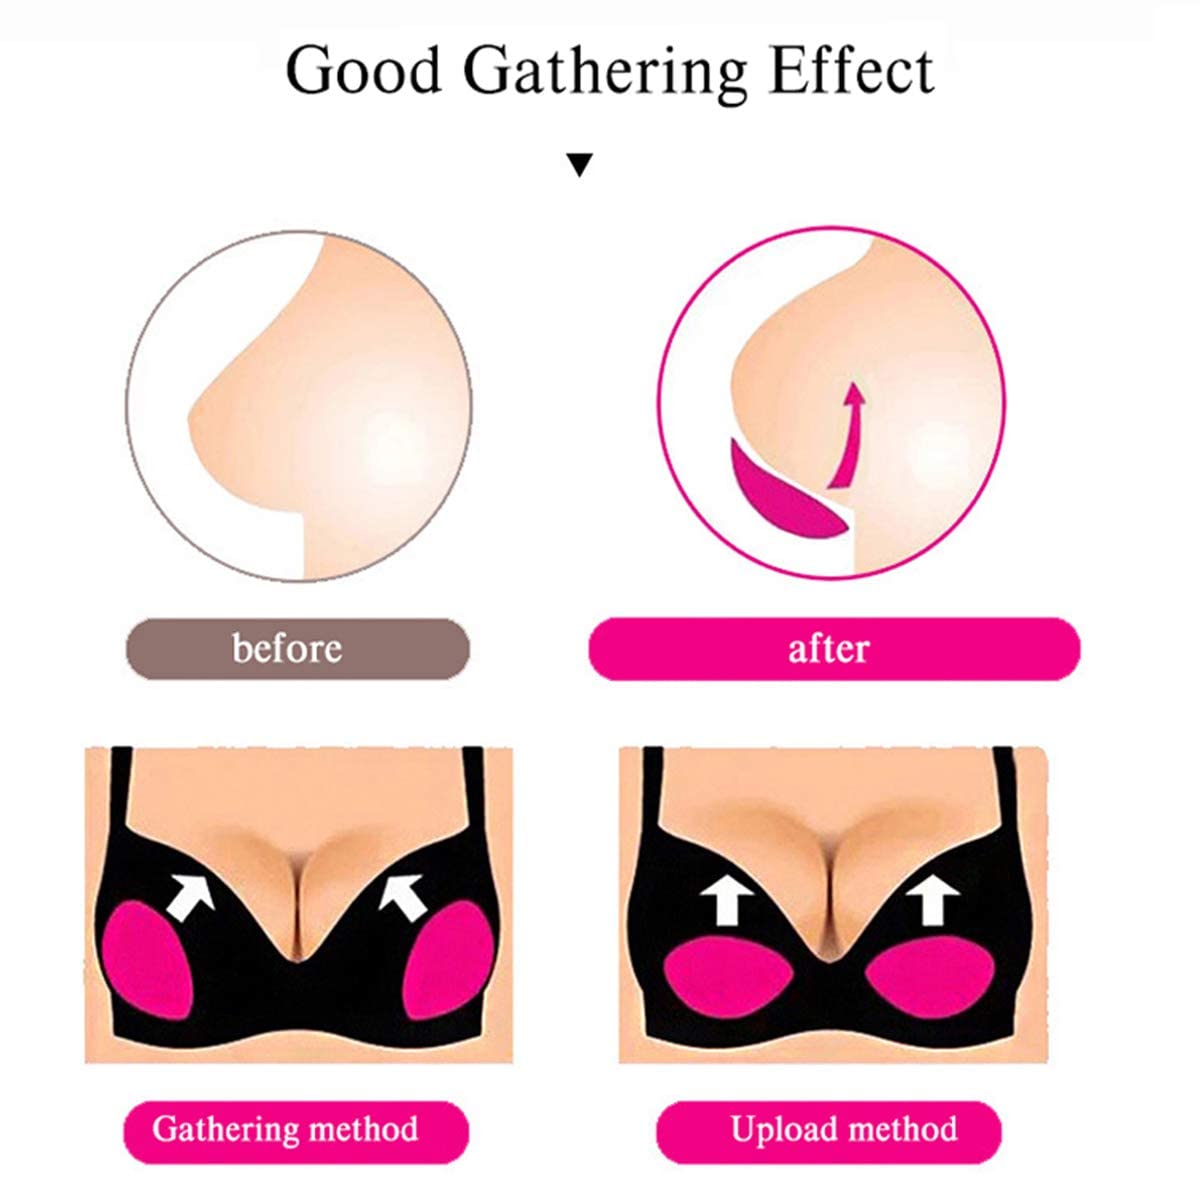 Women's Silicone Adhesive Bra Pads Breast Inserts Breathable Push Up Sticky  Bra Cups